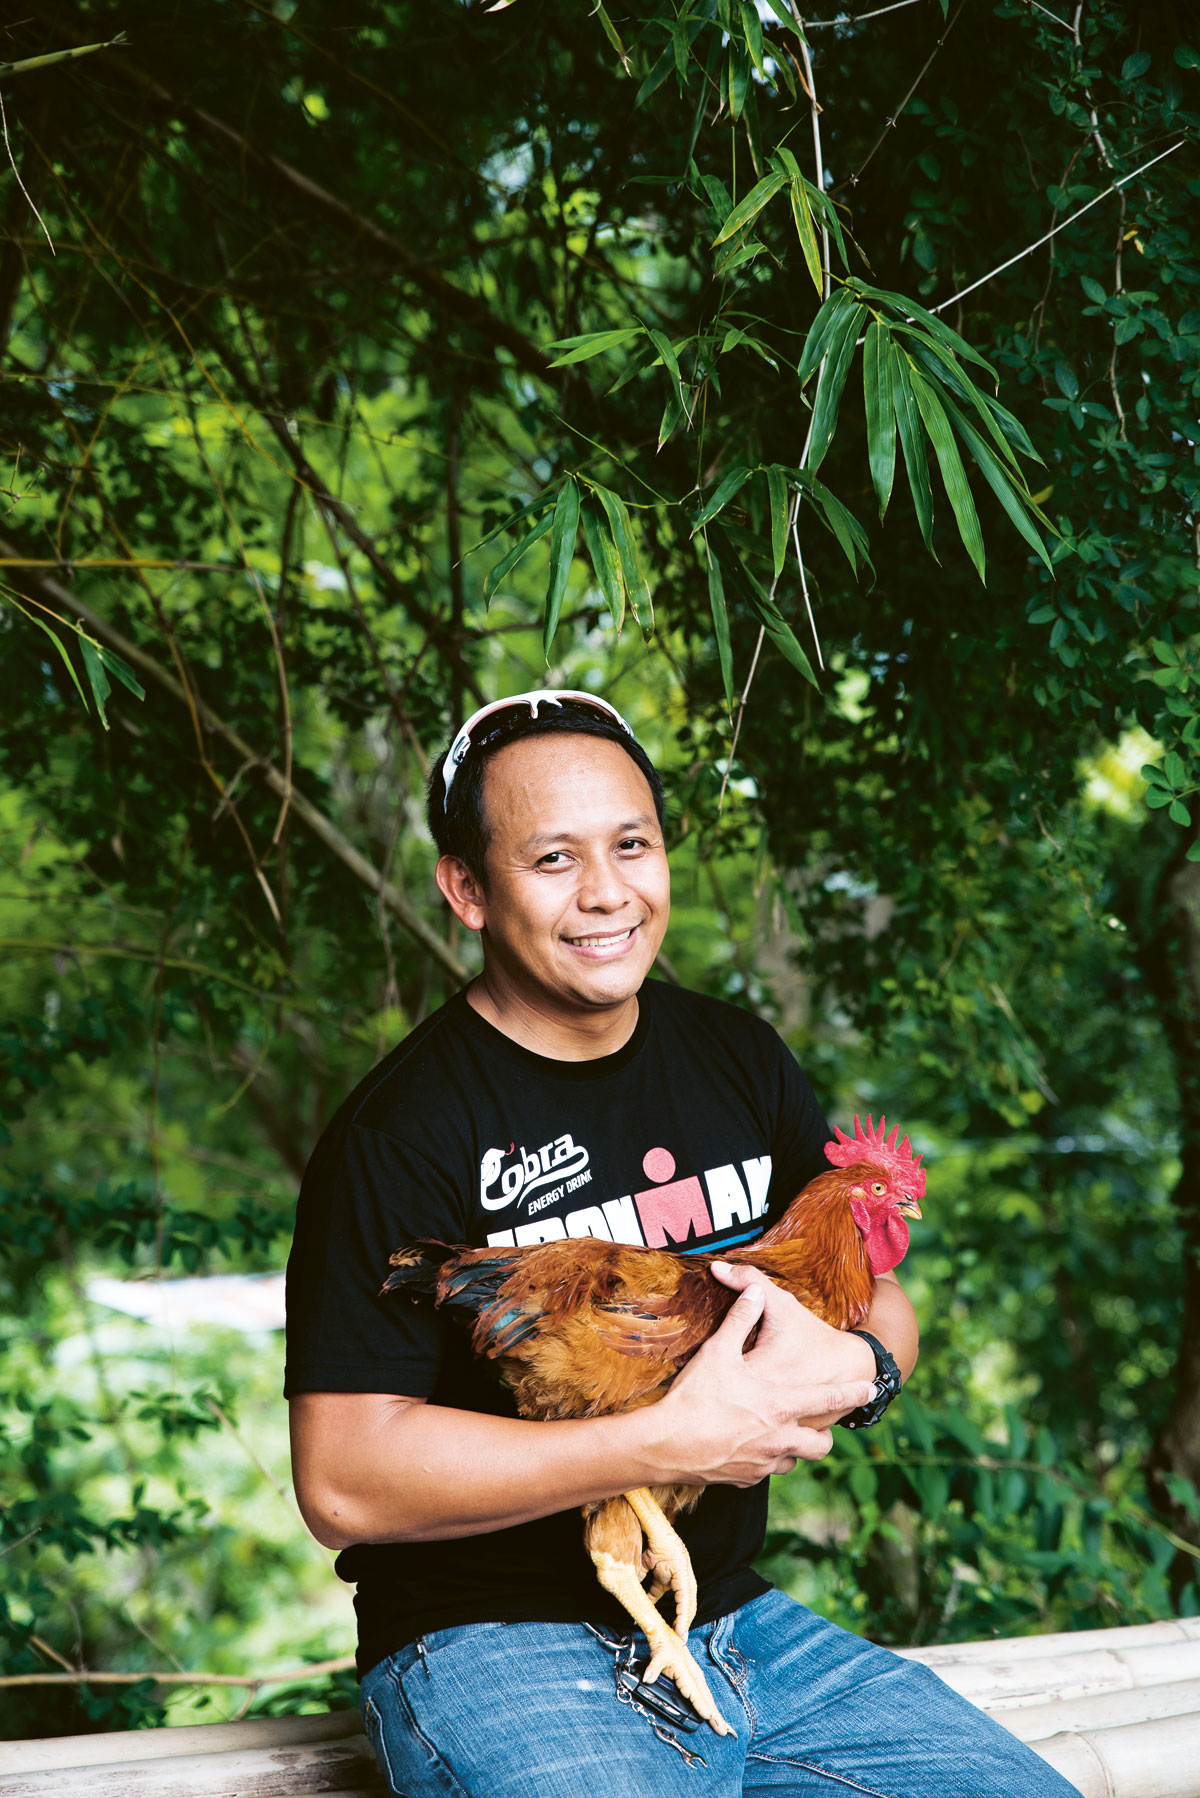 emerson siscar takes pride in having a poultry business focused on non-commercial brown chickens